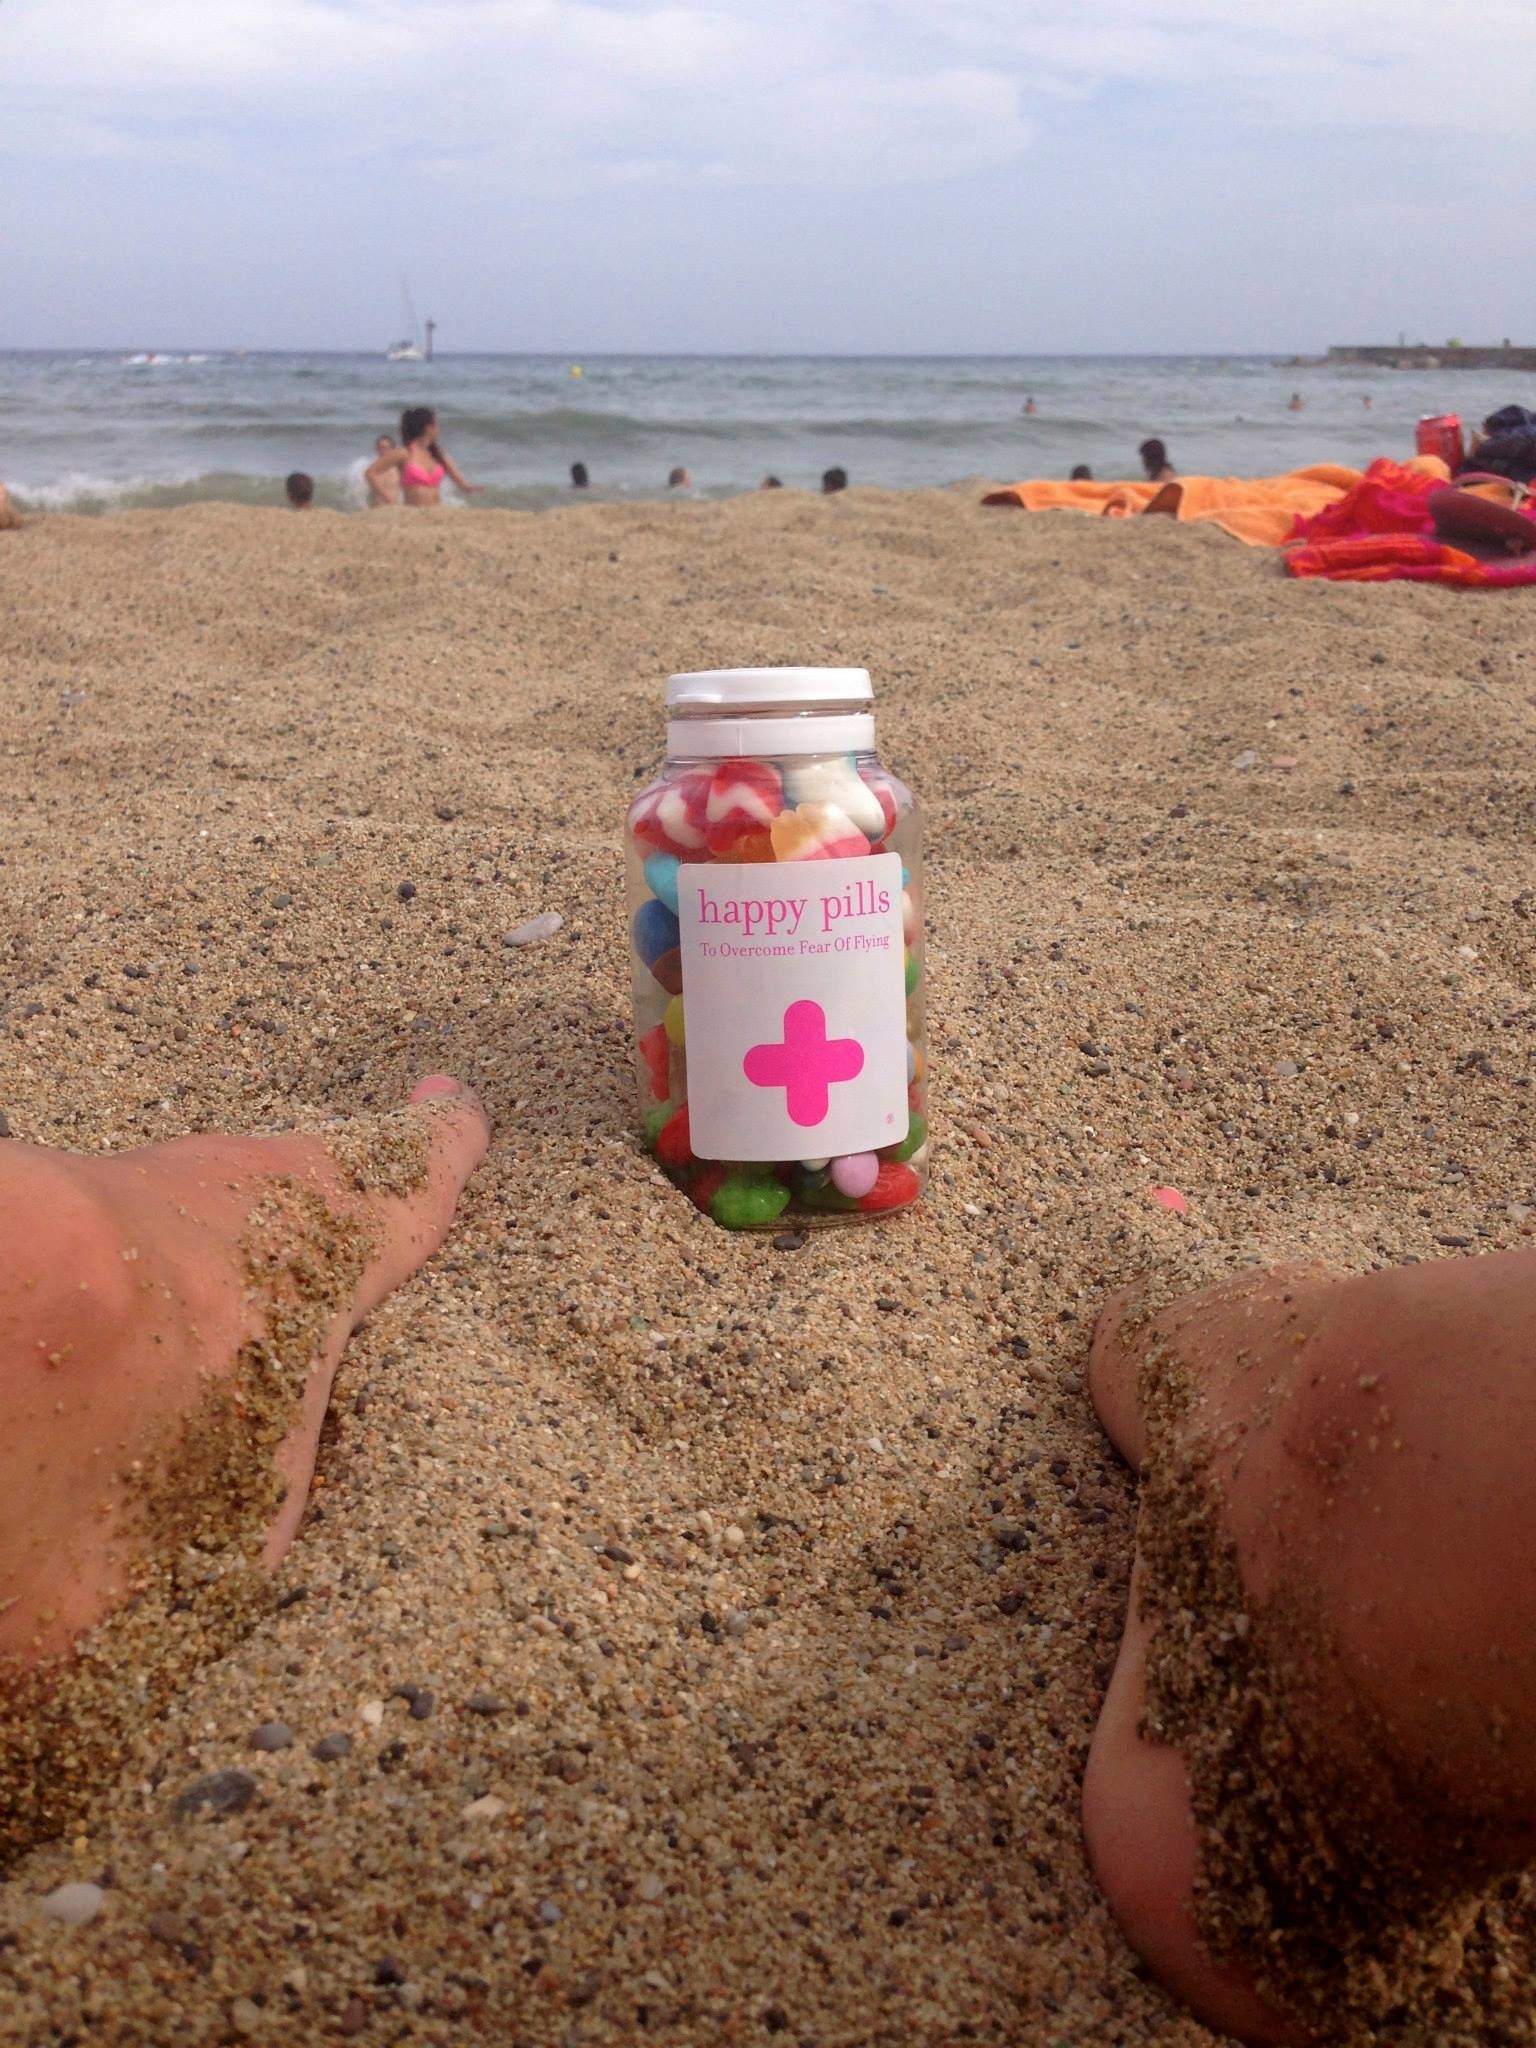 A bottle filled with candy in the sand